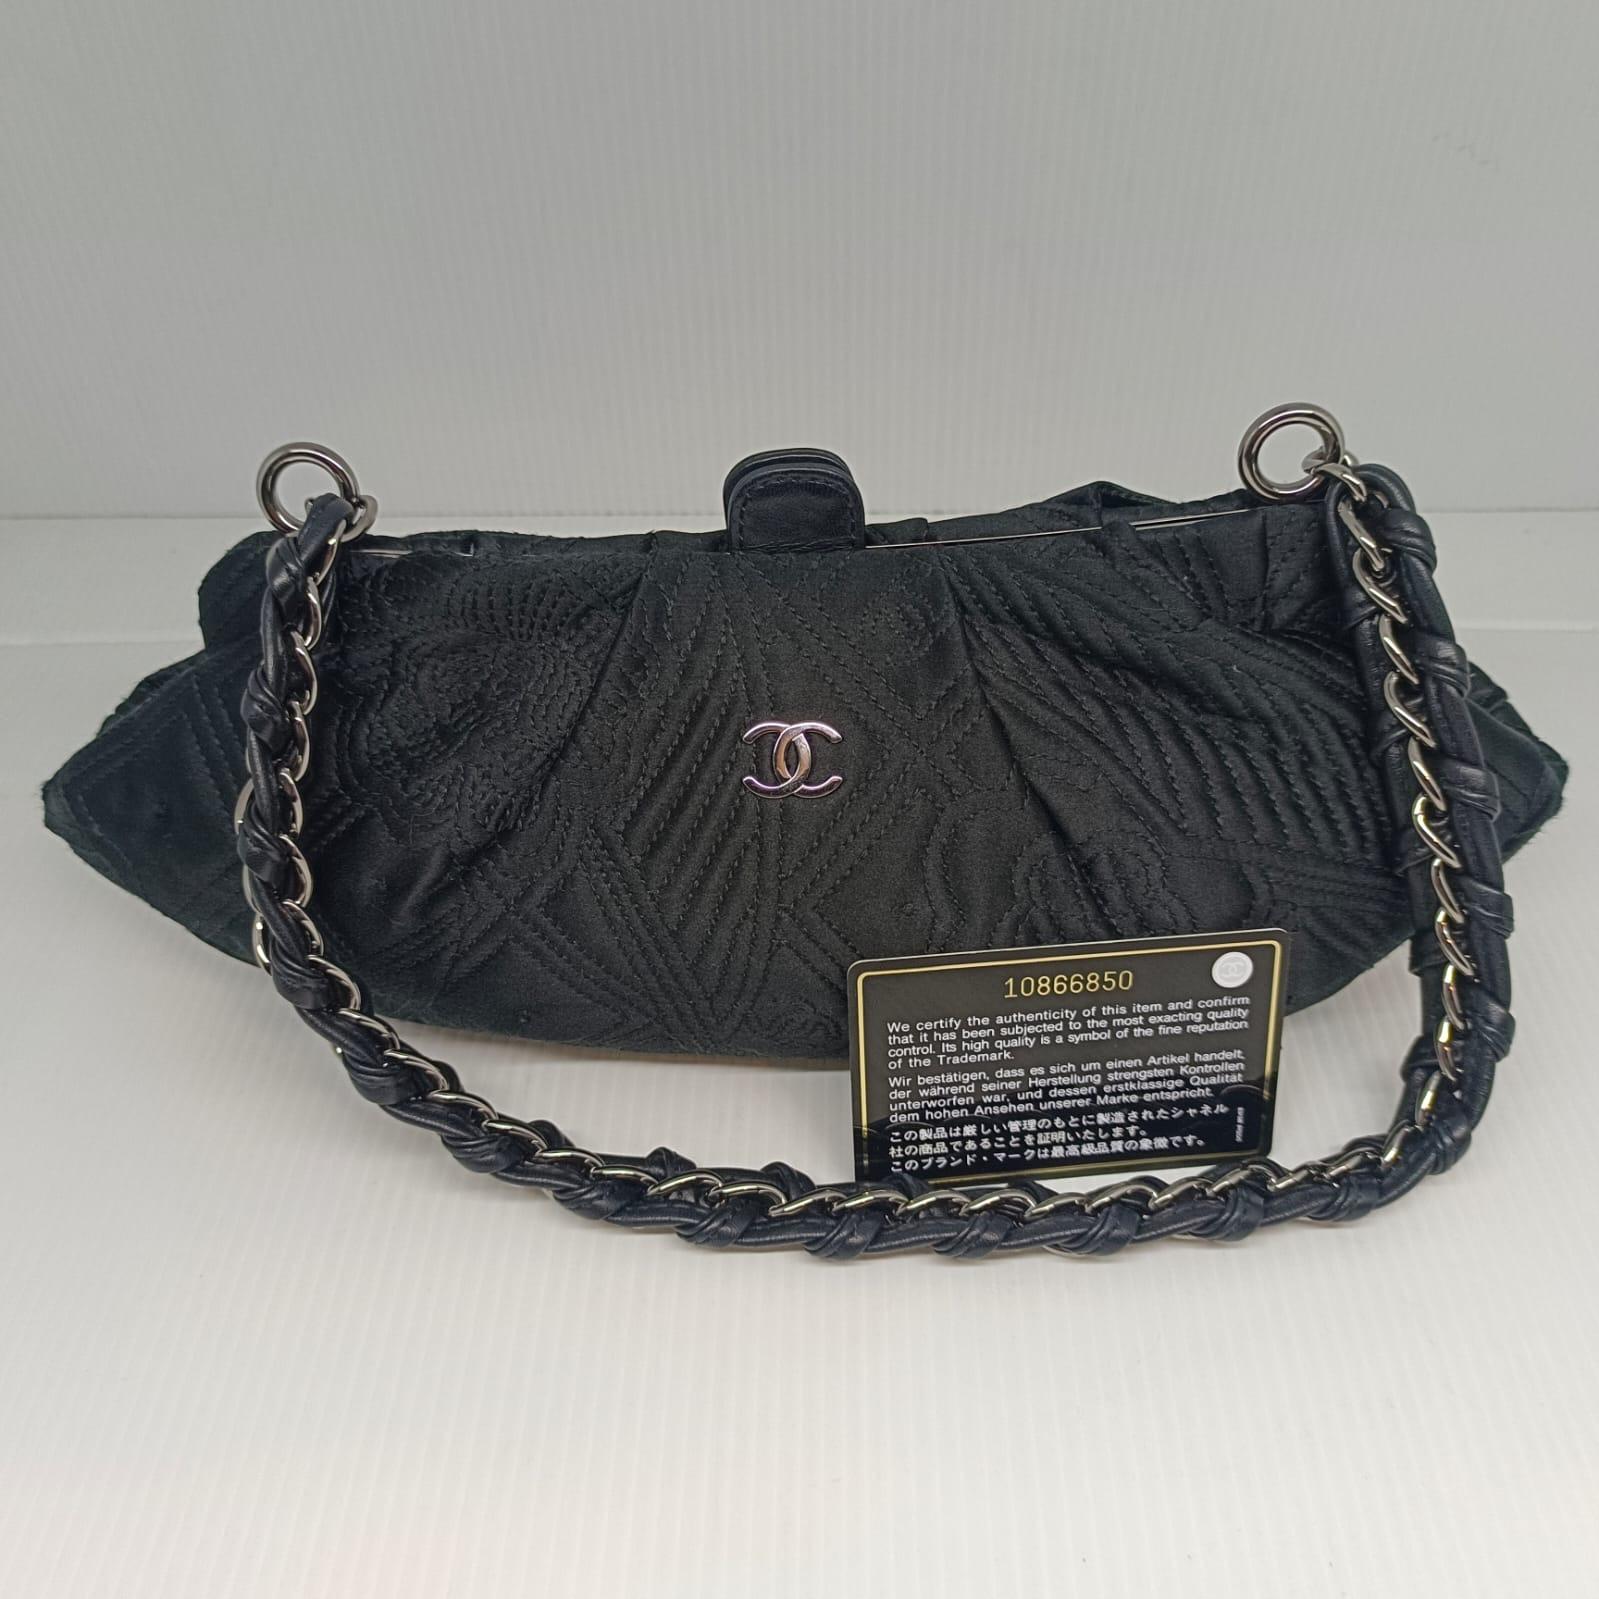 Chanel Black Satin Quilted Evening Bag For Sale 1